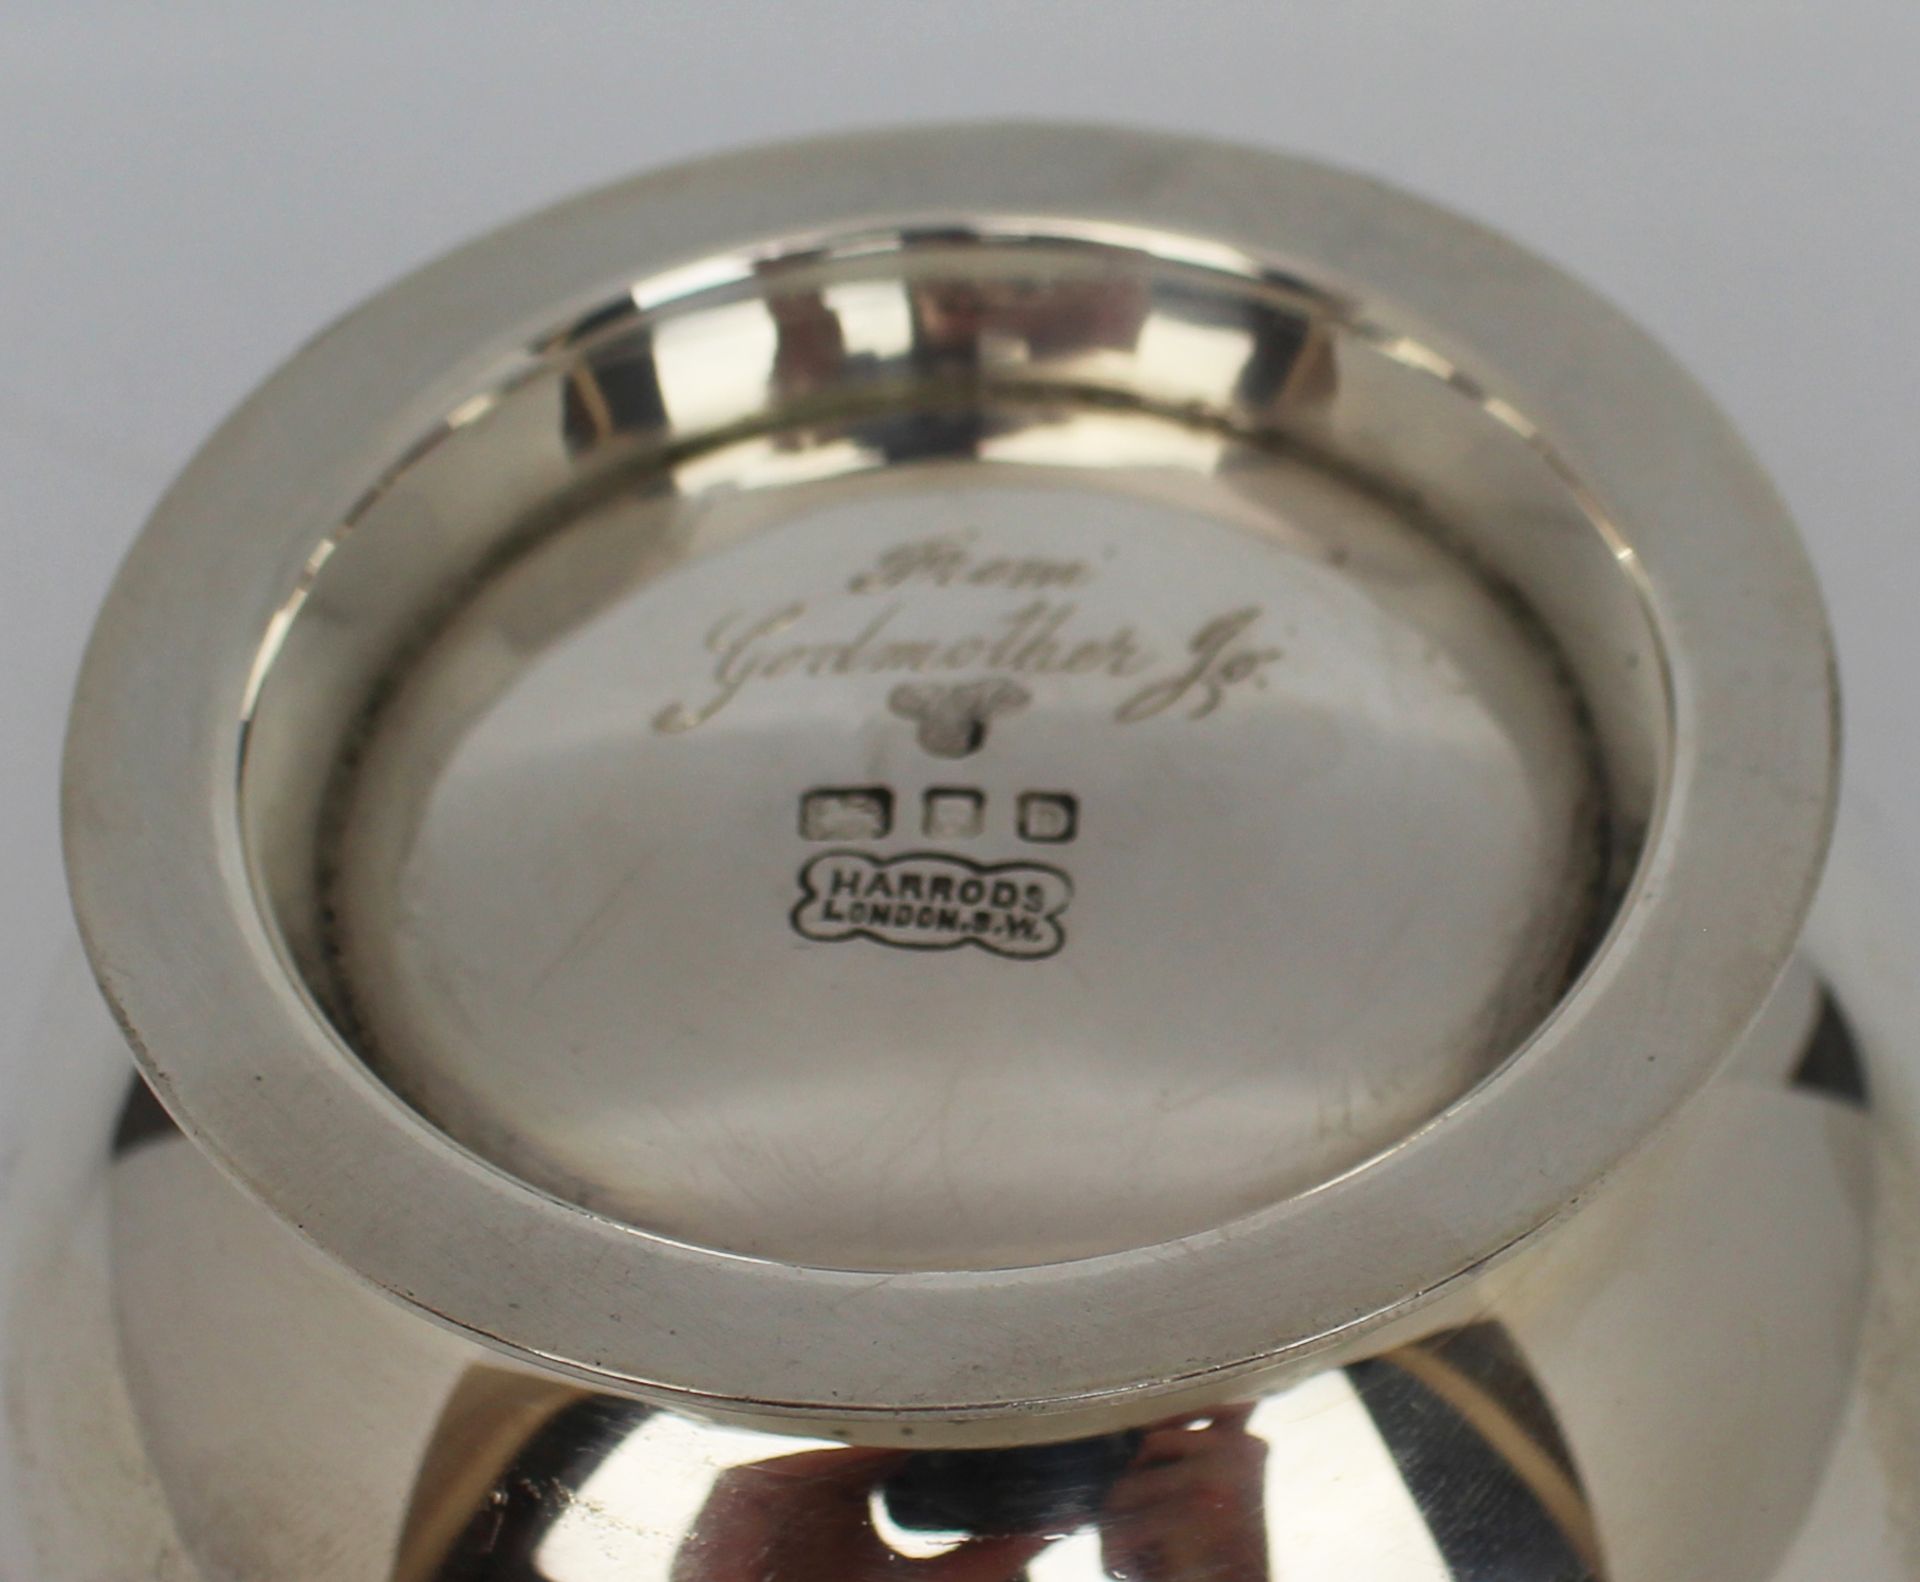 Solid Silver Bowl by Harrods London 1939 - Image 3 of 4